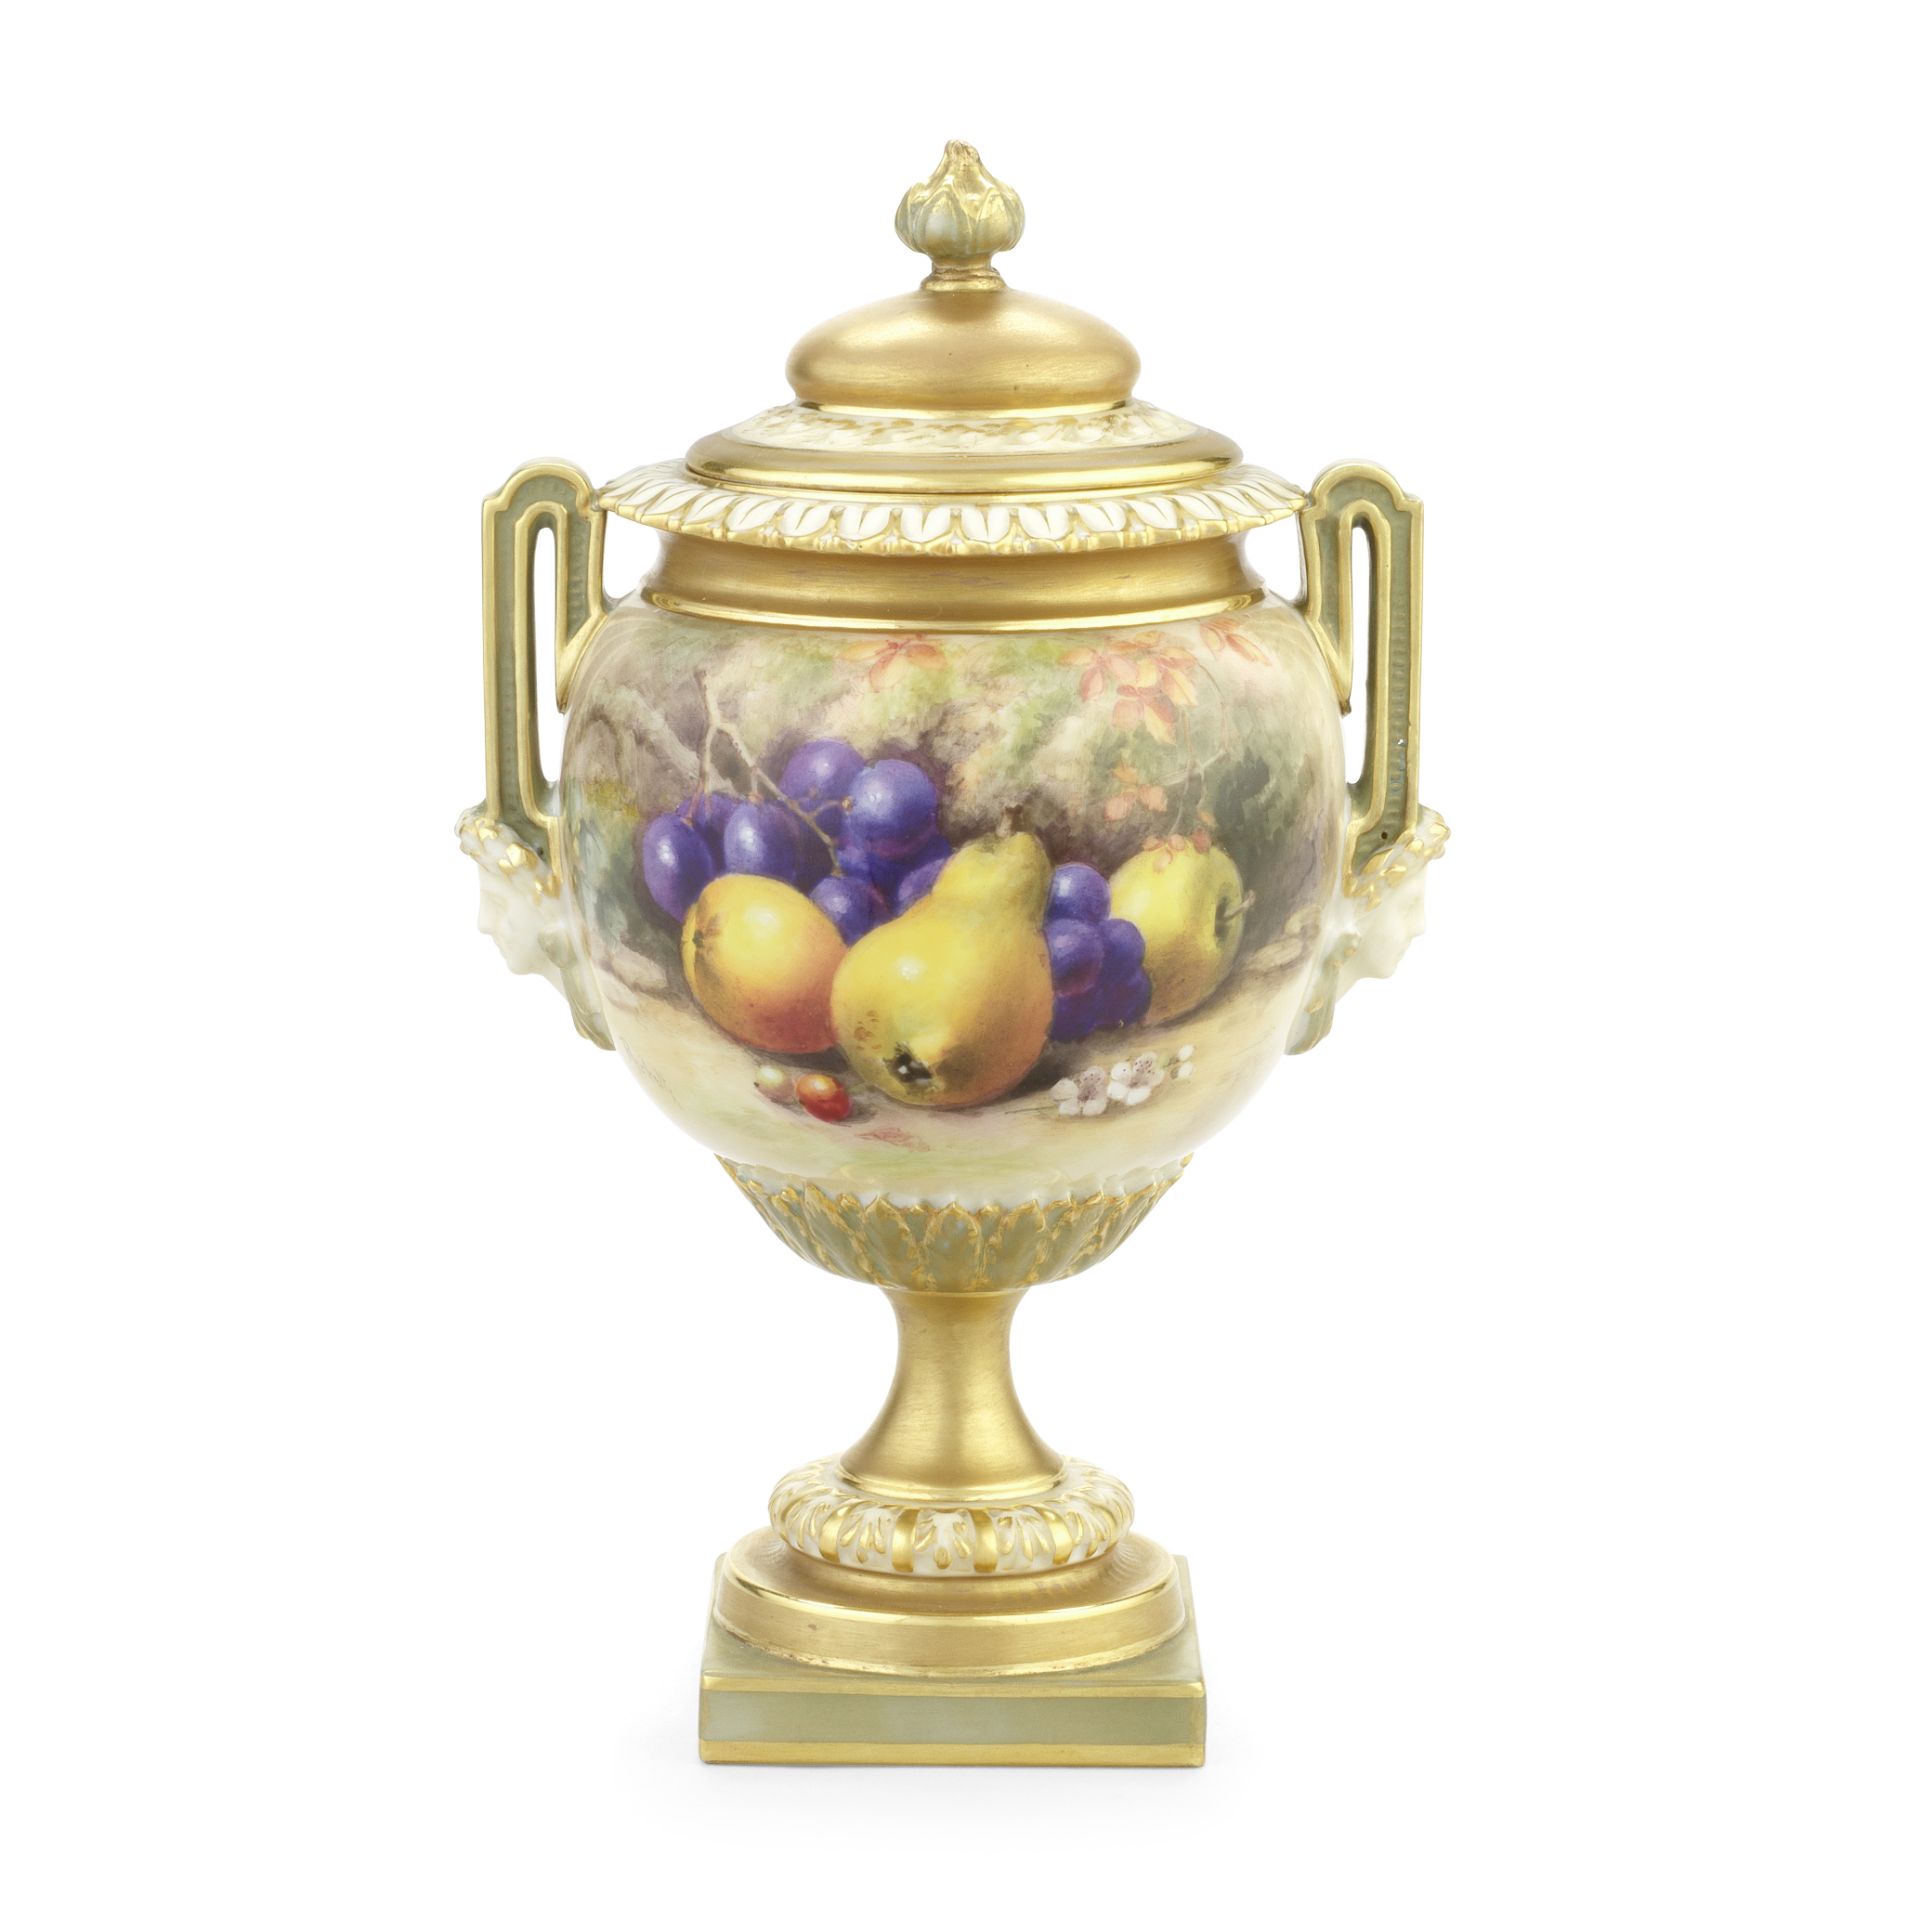 A Royal Worcester 'Painted Fruit' vase and cover by William Ricketts, dated 1911